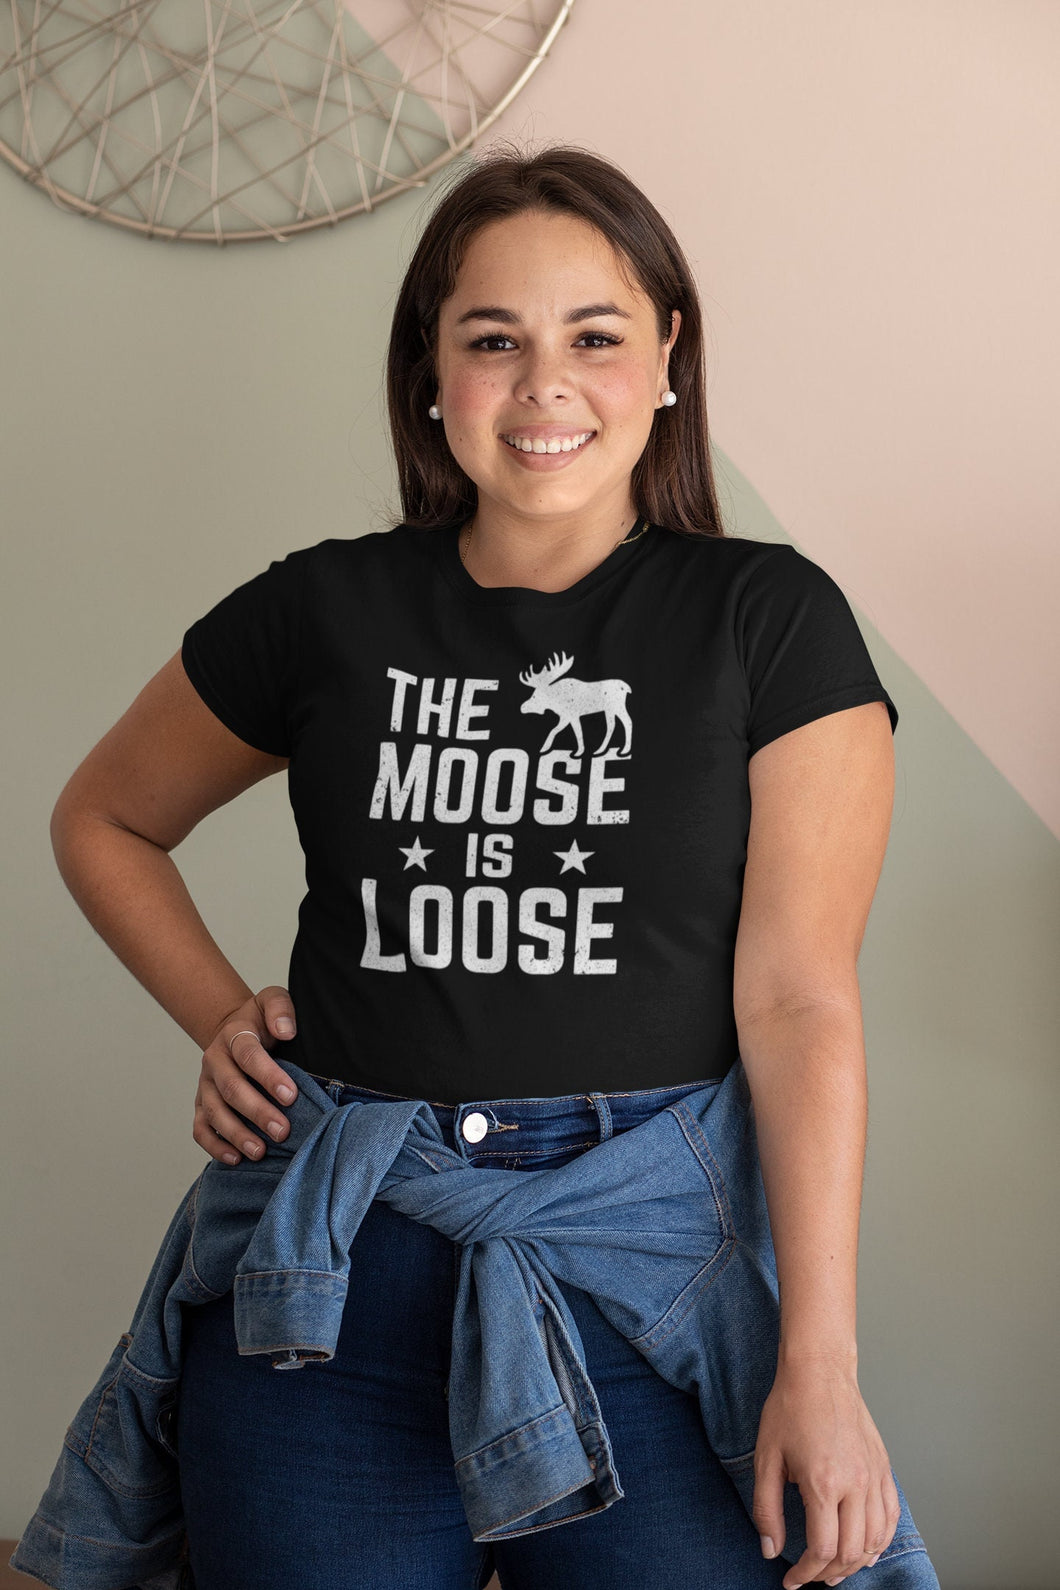 The Moose Is Loose Shirt, Funny Moose Shirt, Moose Lover Shirt, Moose Owner Shirt, Hiking Shirt